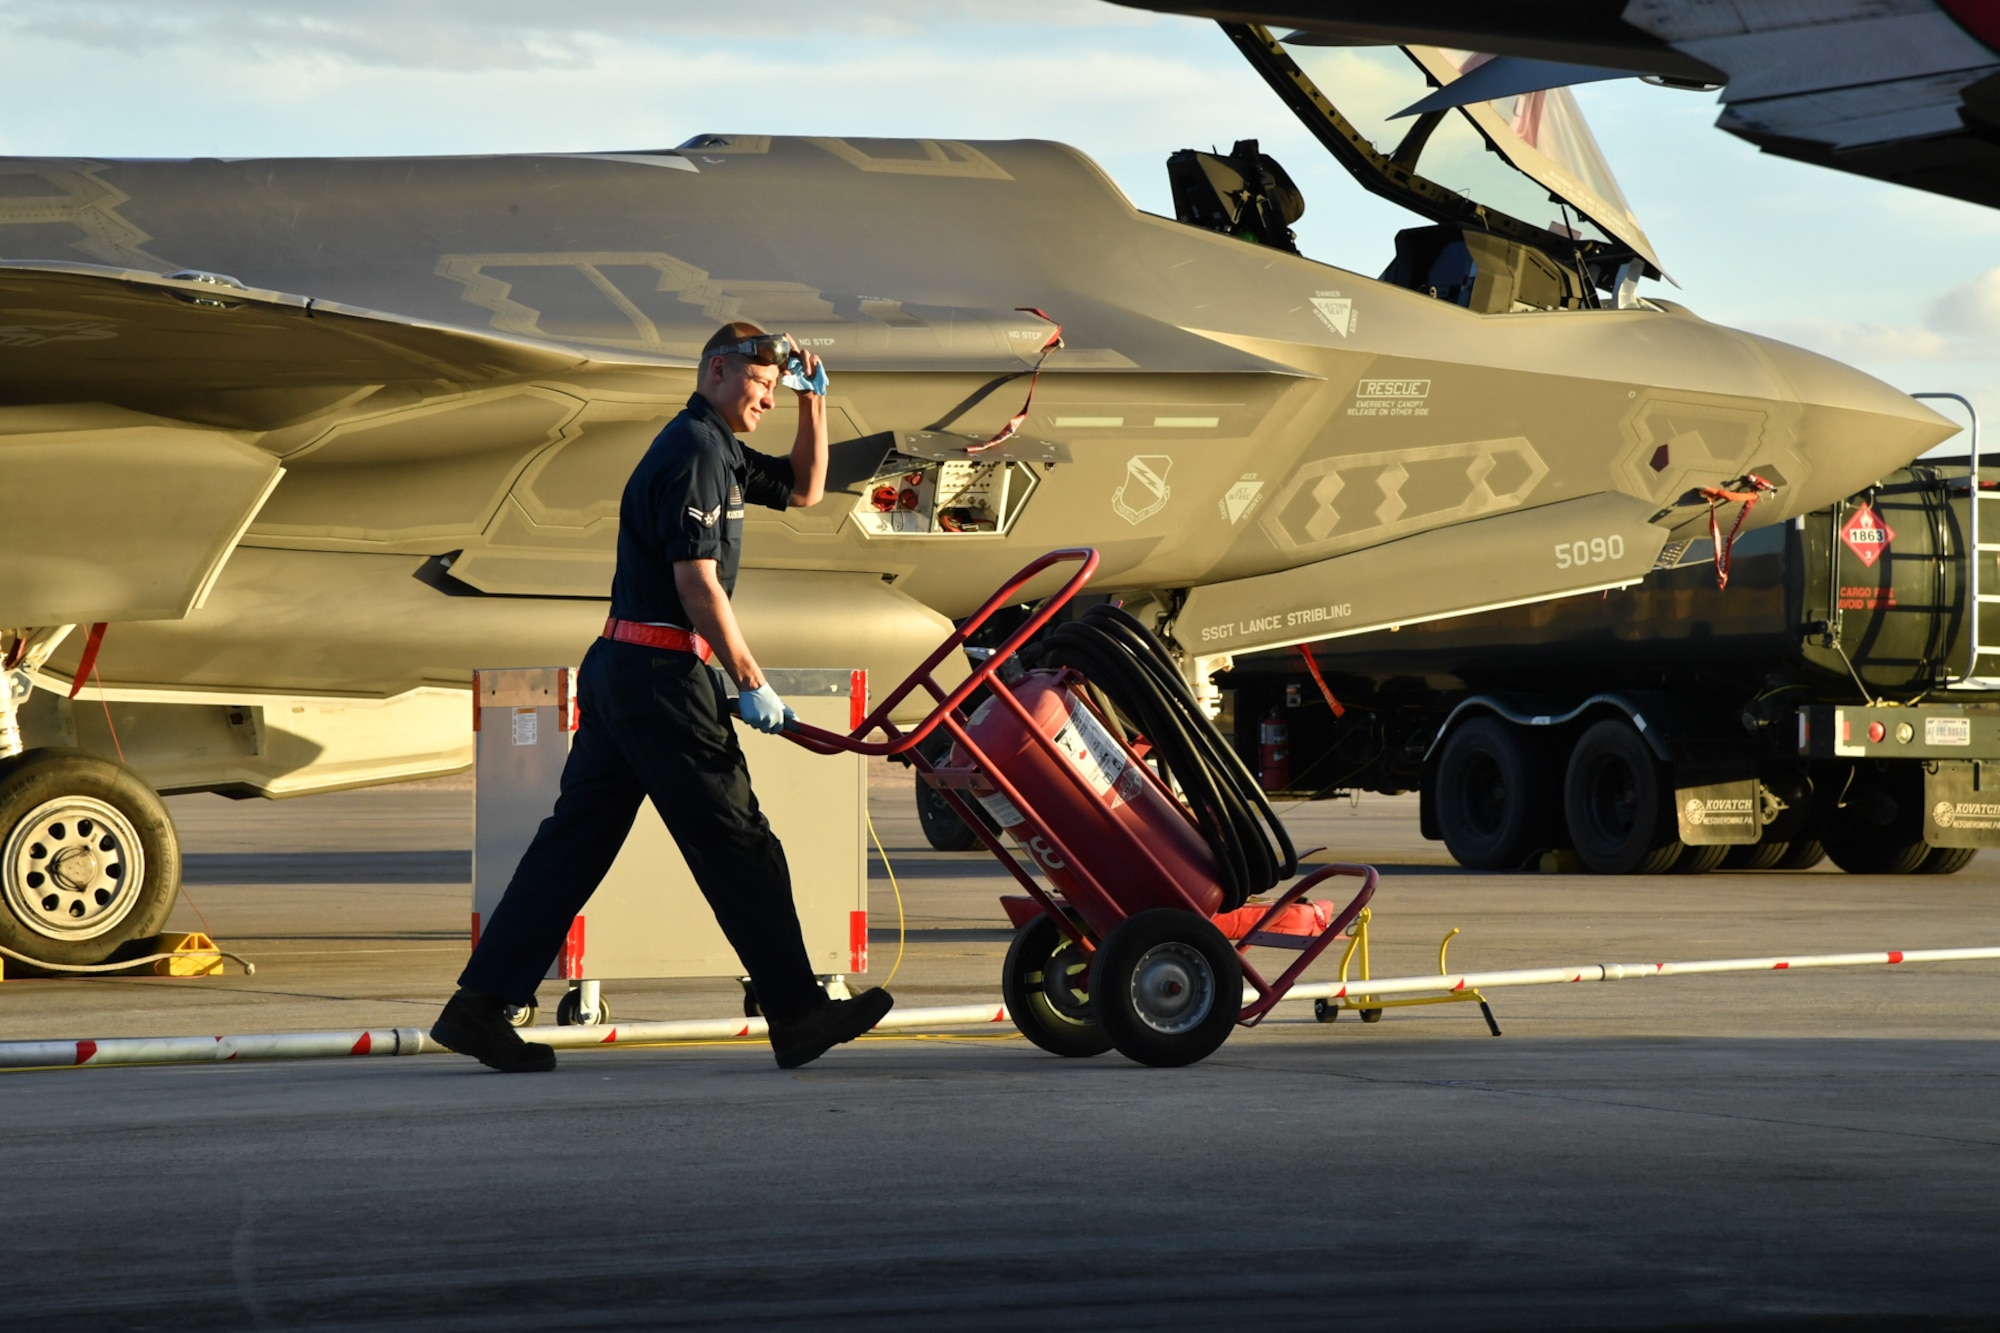 Airman 1st Class Nathan Kosters, a crew chief with the 34th Aircraft Maintenance Unit, Hill Air Force Base, Utah, moves a halon bottle while fueling an F-35A Lightning II aircraft Feb. 7 during Red Flag 17-1 at Nellis Air Force Base, Nevada. (U.S. Air Force photo by R. Nial Bradshaw)